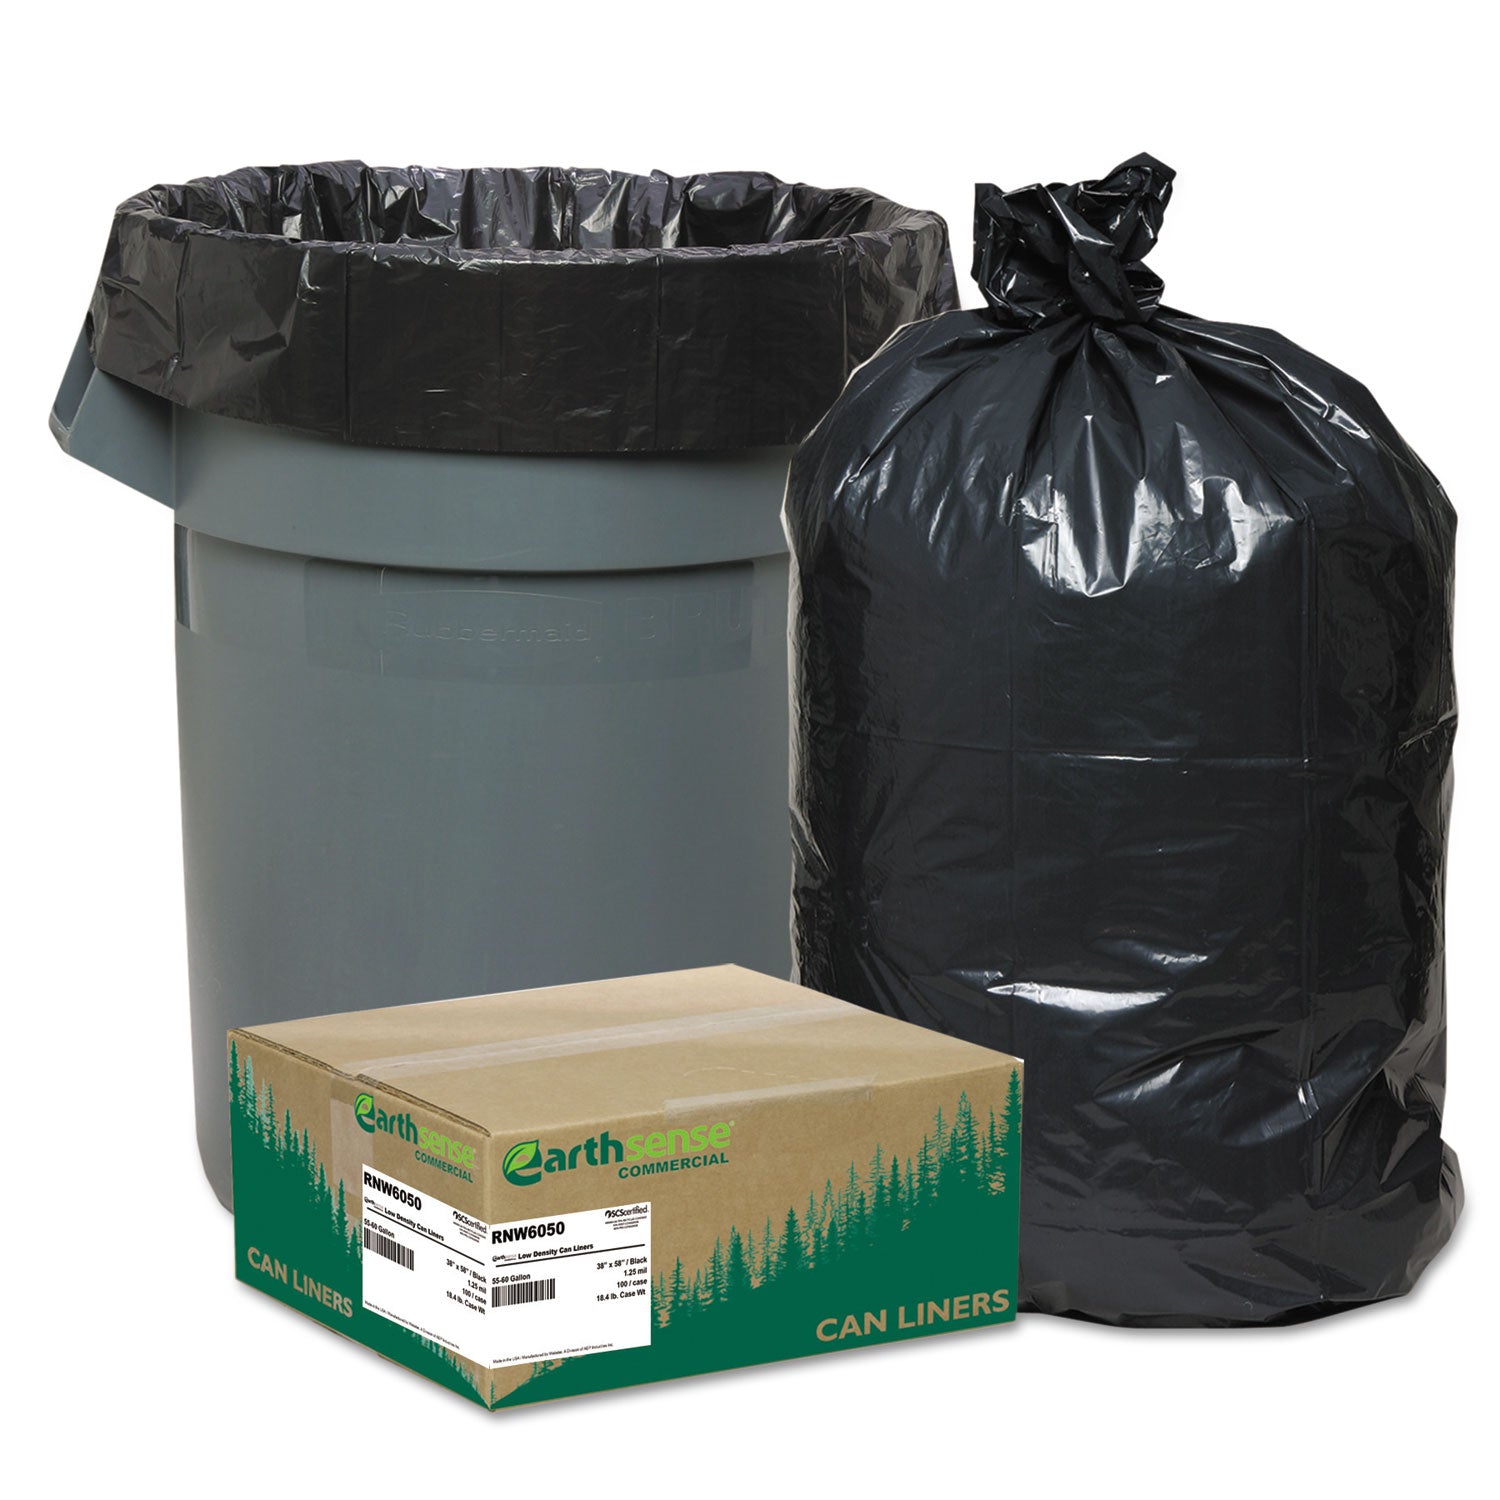 linear-low-density-recycled-can-liners-60-gal-125-mil-38-x-58-black-10-bags-roll-10-rolls-carton_wbirnw6050 - 1